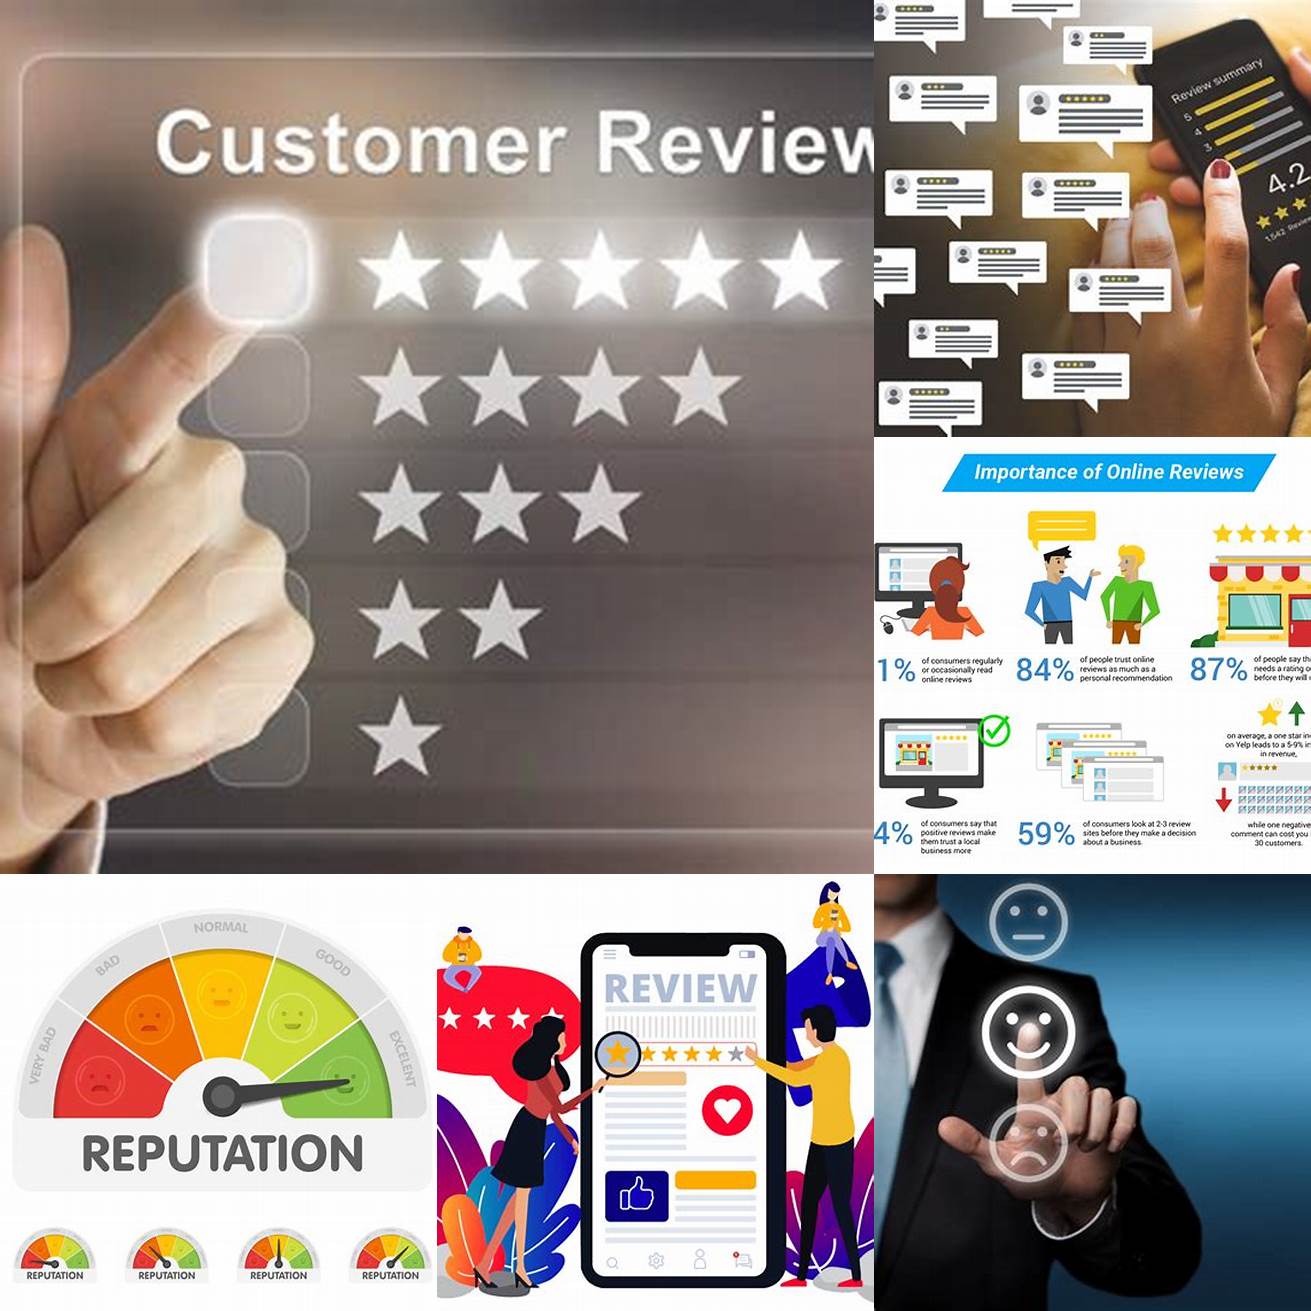 Reputation Research the distributors reputation by reading customer reviews and checking their Better Business Bureau rating